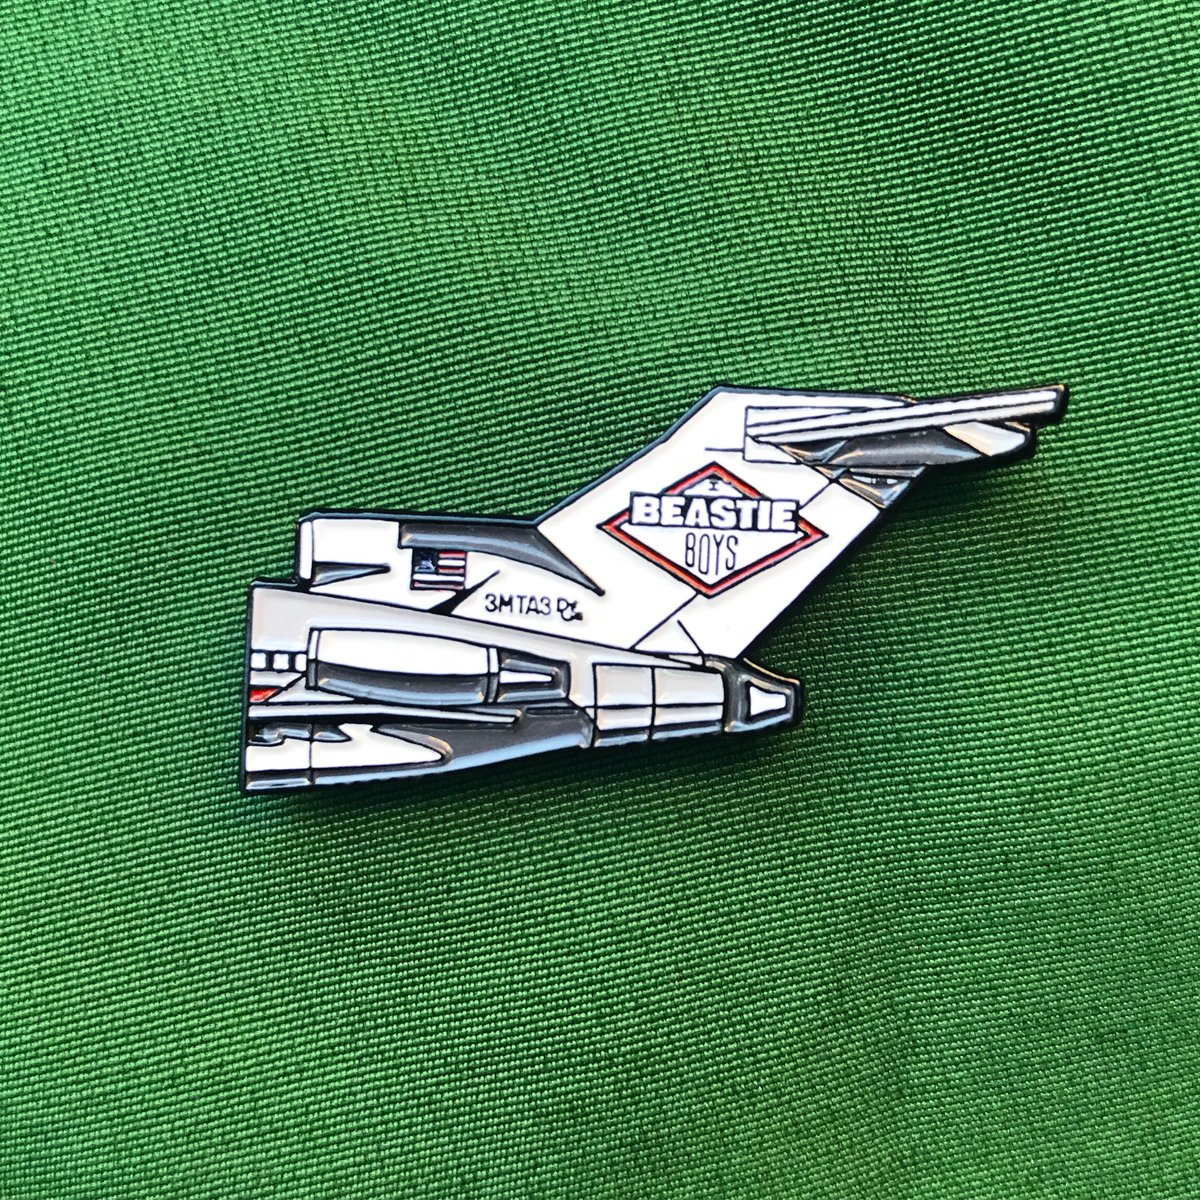 Image of Beastie Boys, “Licensed to Ill” pin